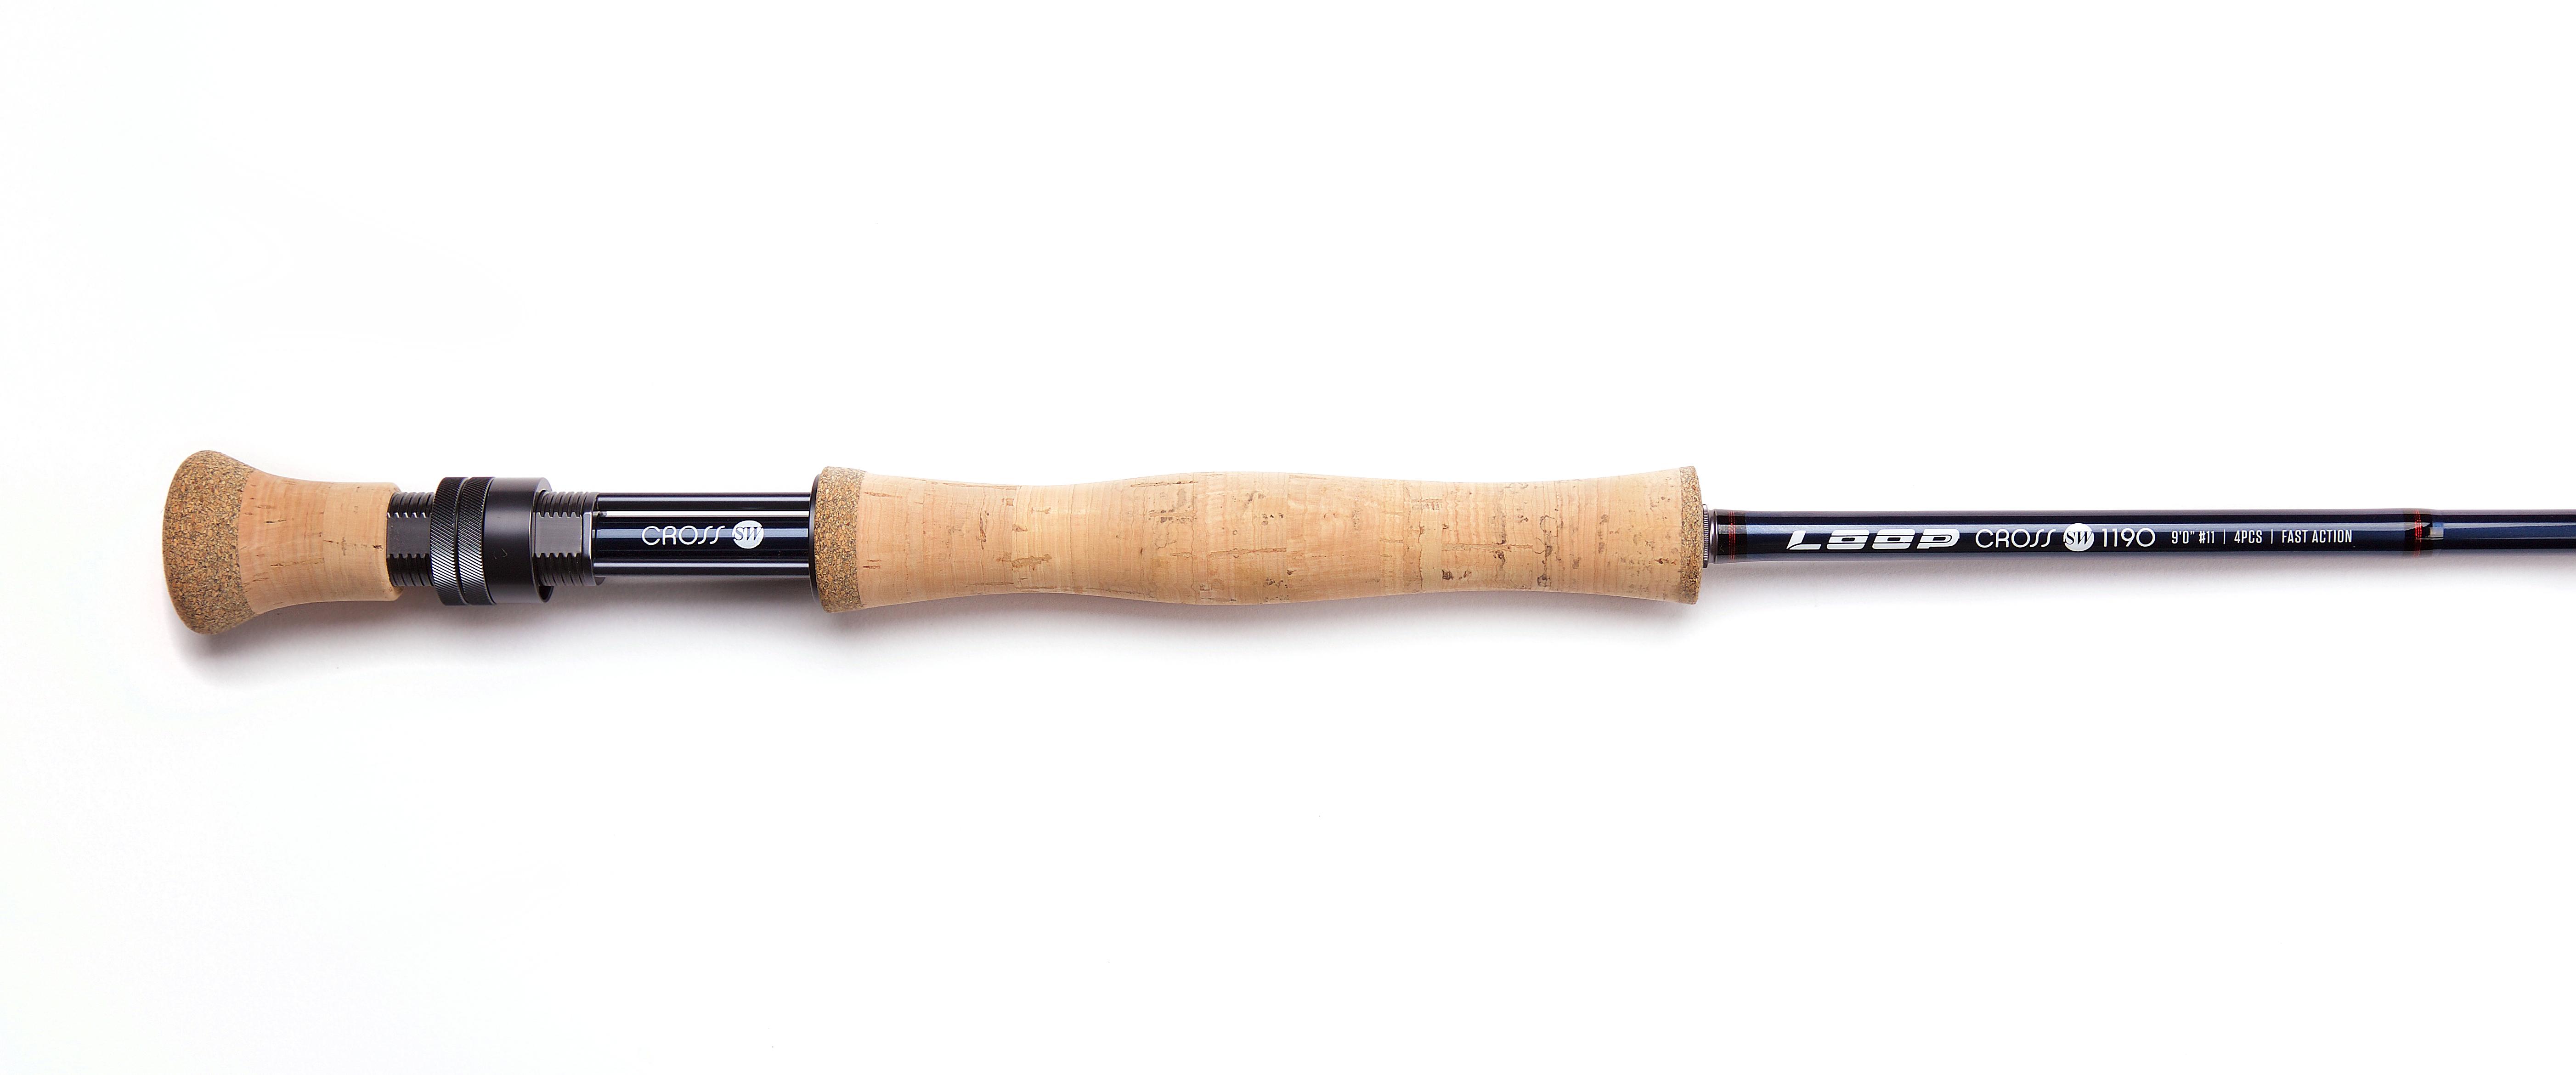 9wt Fly Rod Built By Randy Towe 9ft 9wt (4piece), 52% OFF